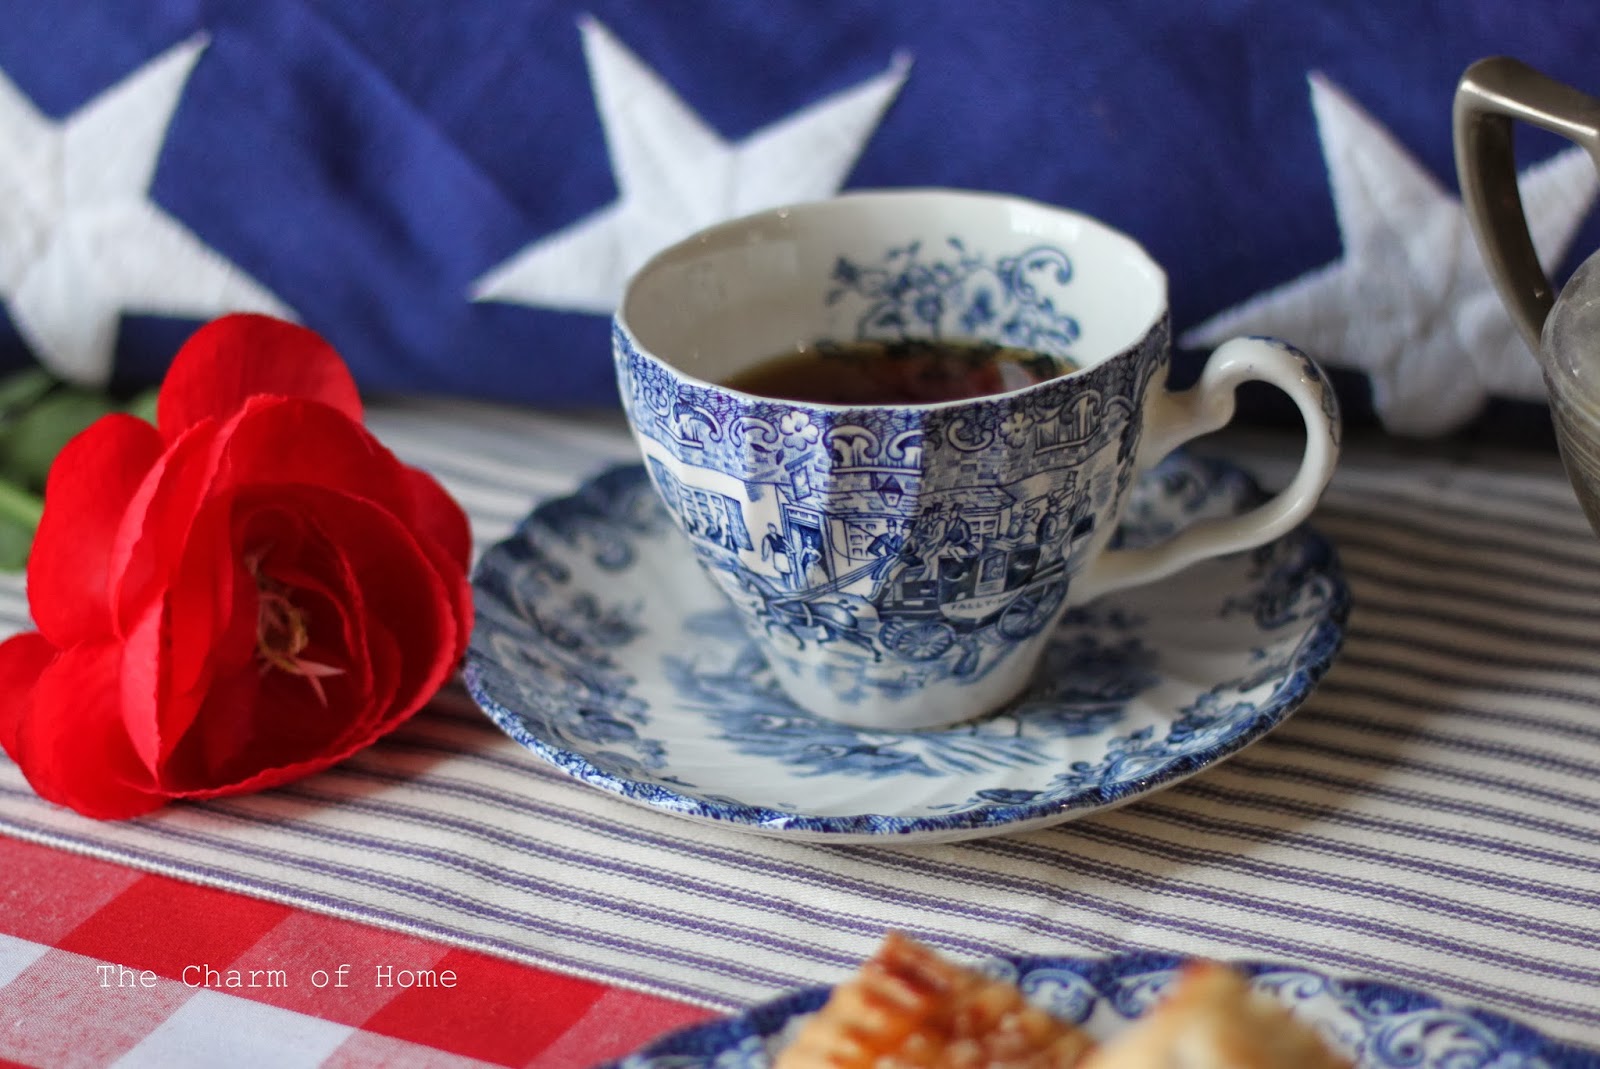 Presidents' Day Tea, The Charm of Home